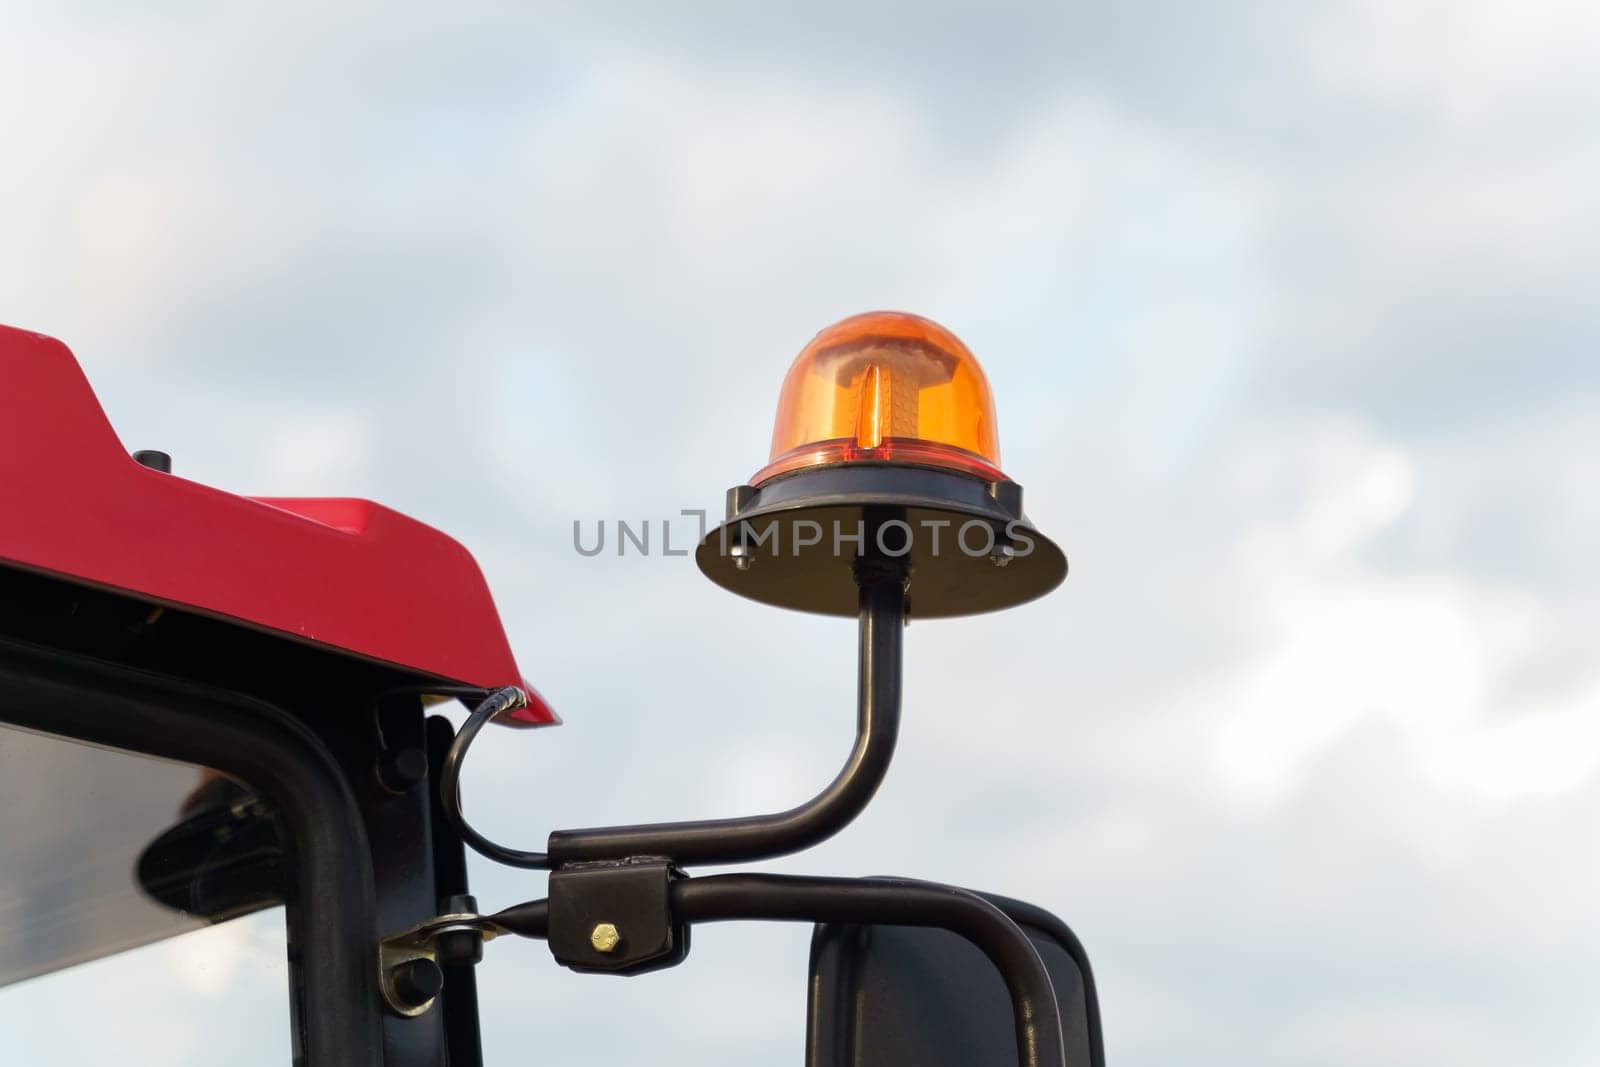 Orange warning beacon light mounted on the cab of a red farm tractor, symbolizing agricultural safety, captured against a backdrop of a partly cloudy sky.